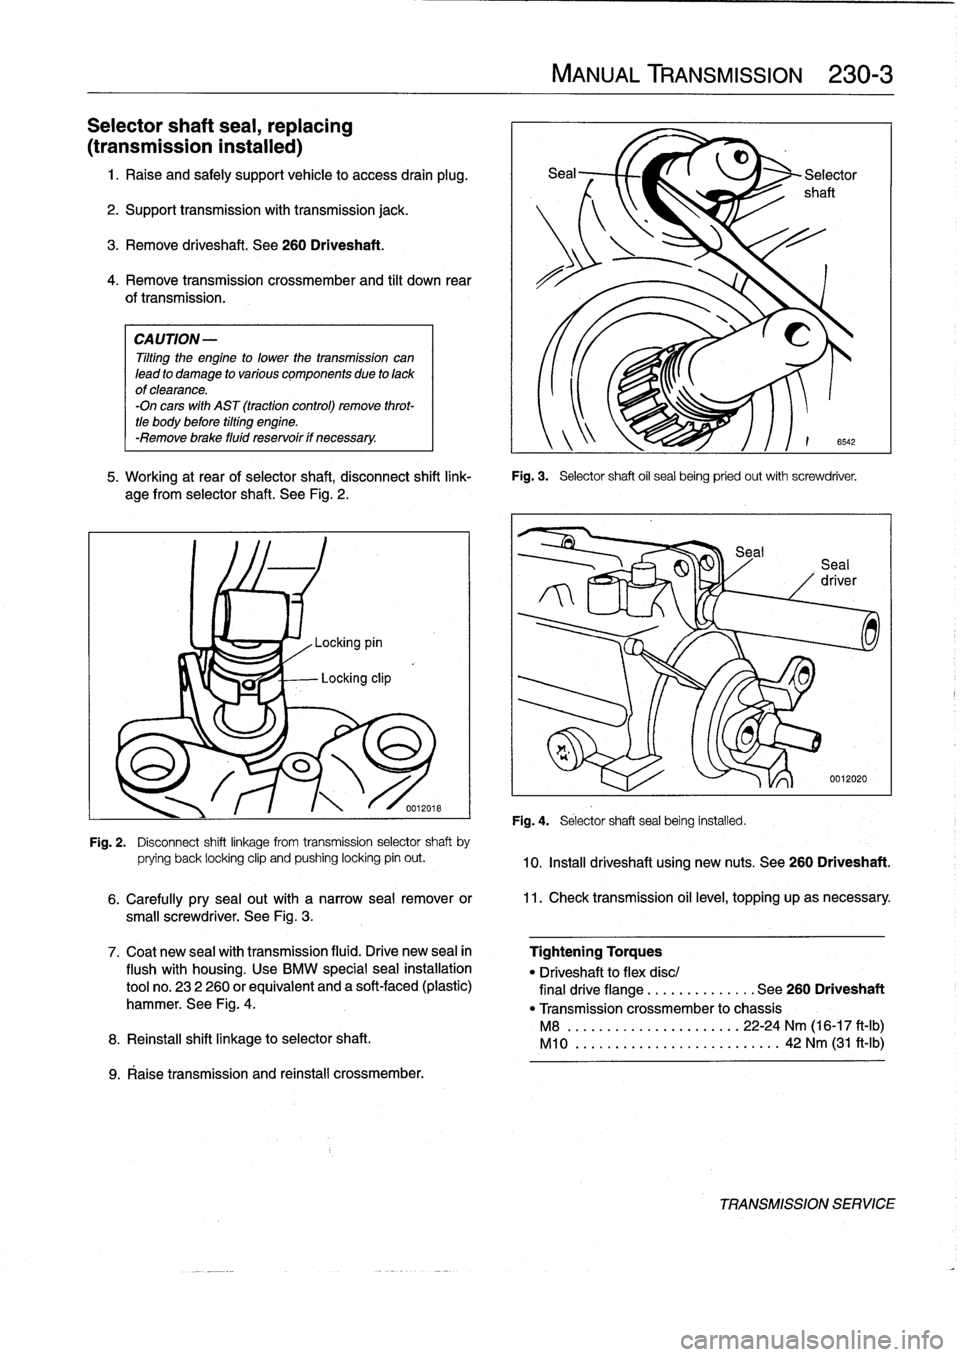 BMW 323i 1995 E36 User Guide 
Selector
shaft
seal,
replacing

(transmission
instalied)

1
.
Raise
and
safely
support
vehicle
to
access
drain
plug
.

2
.
Support
transmission
with
transmission
jack
.

3
.
Remove
driveshaft
.
See
2